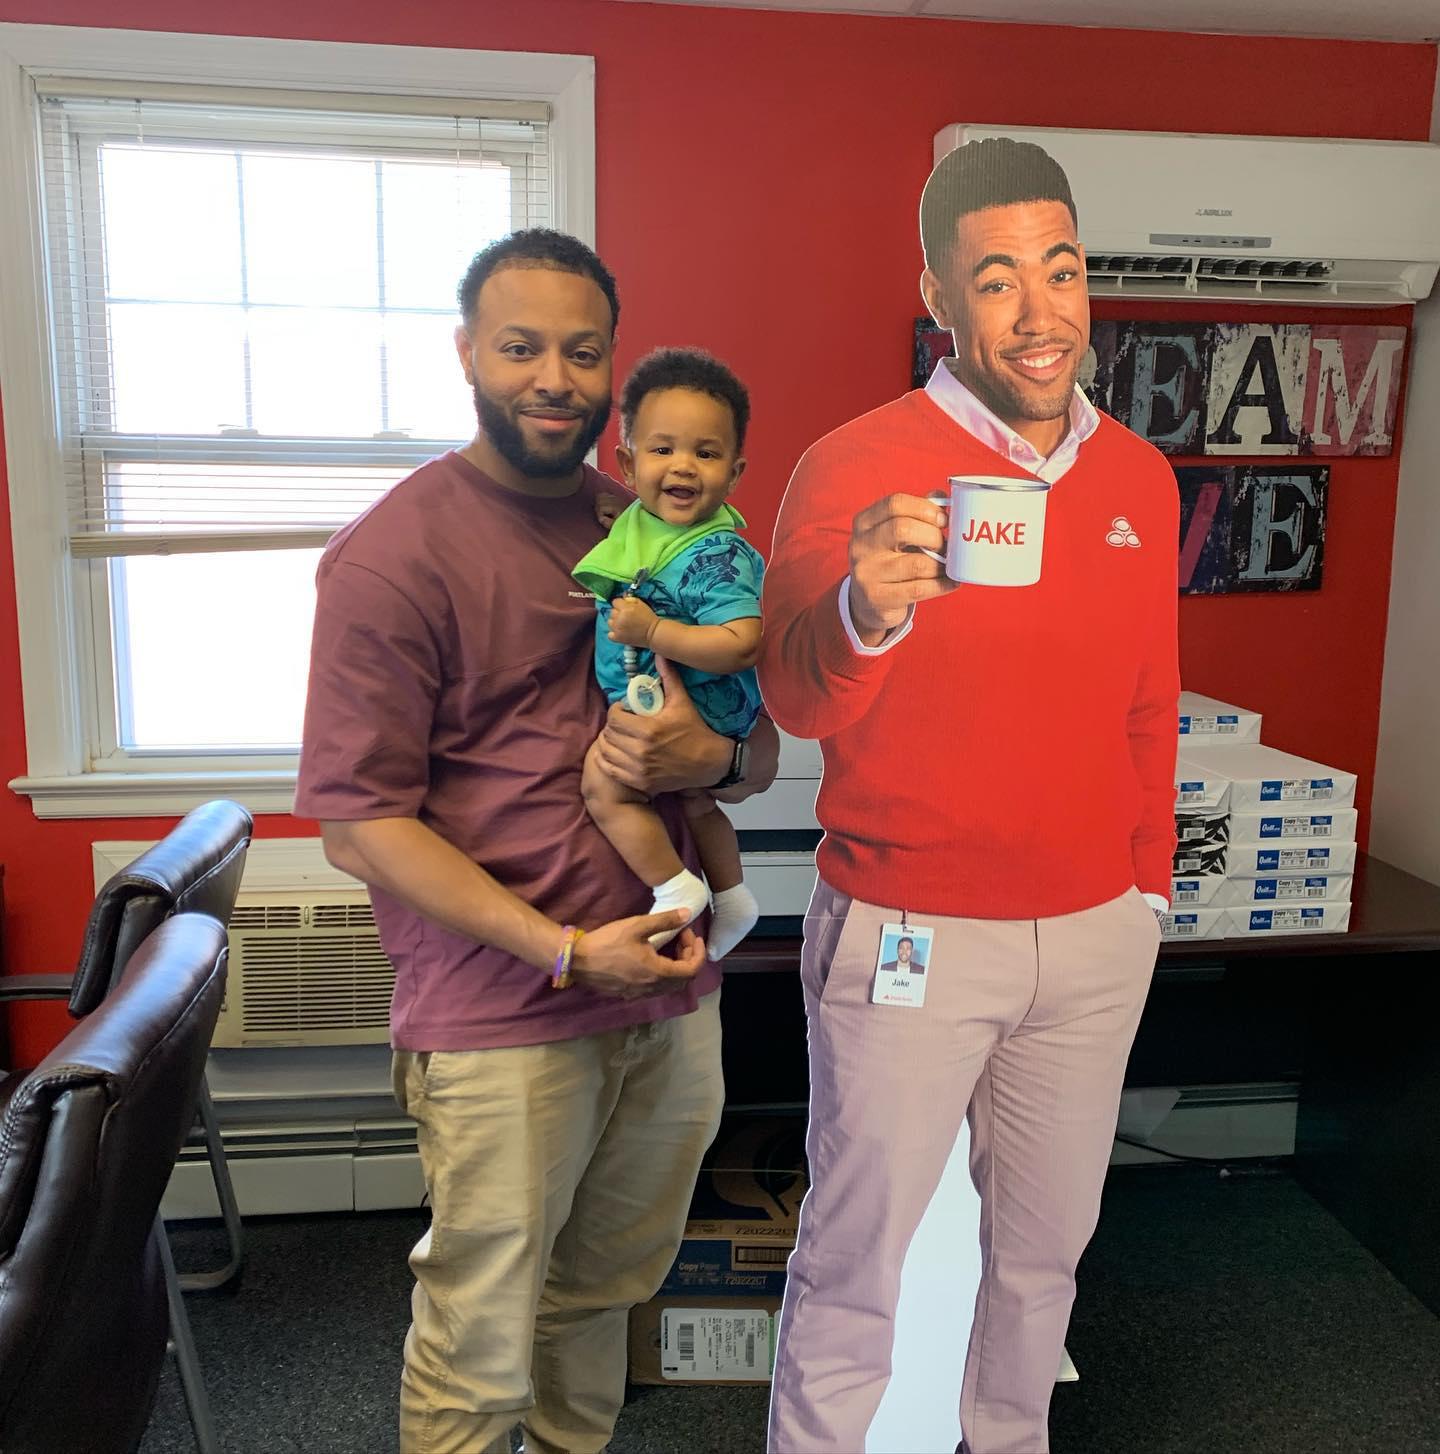 Hanging with Jake from State Farm today in the office!